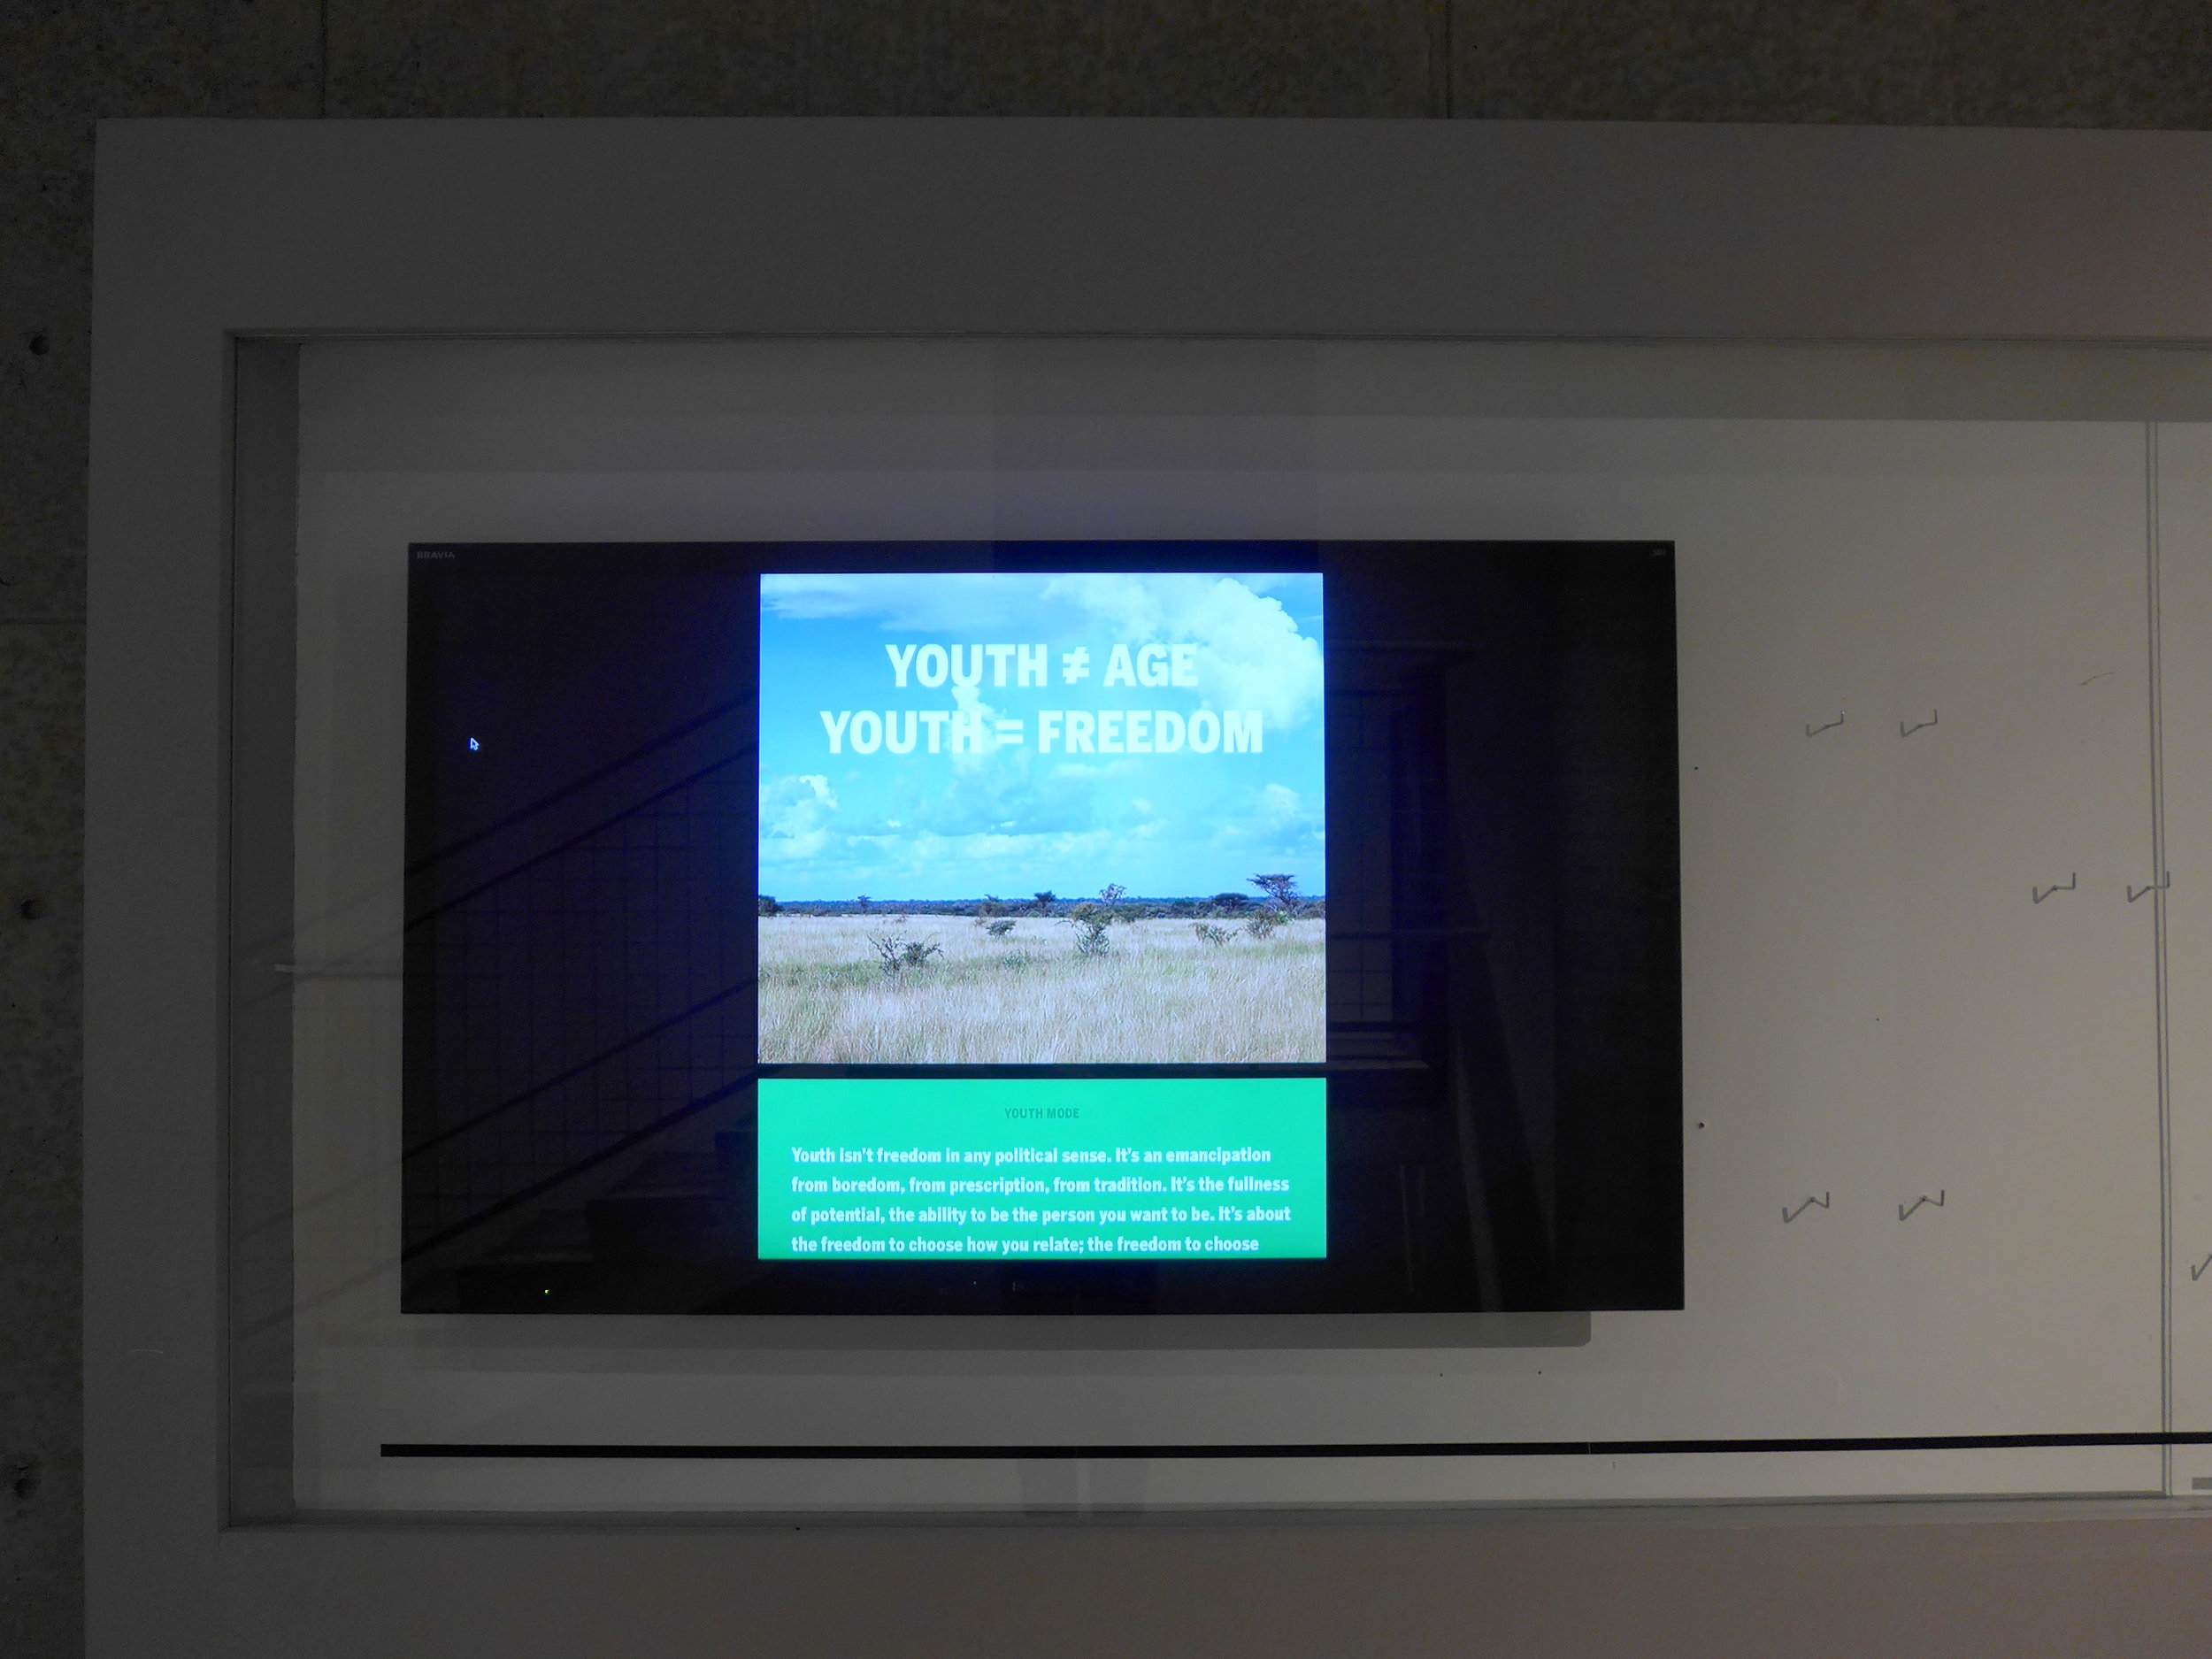  K-Hole &amp; Box 1824,  YOUTH MODE: A REPORT ON FREEDOM , 2013, 40-page downloadable digital publication. Display Case presentation, September 2–December 21, 2014. 